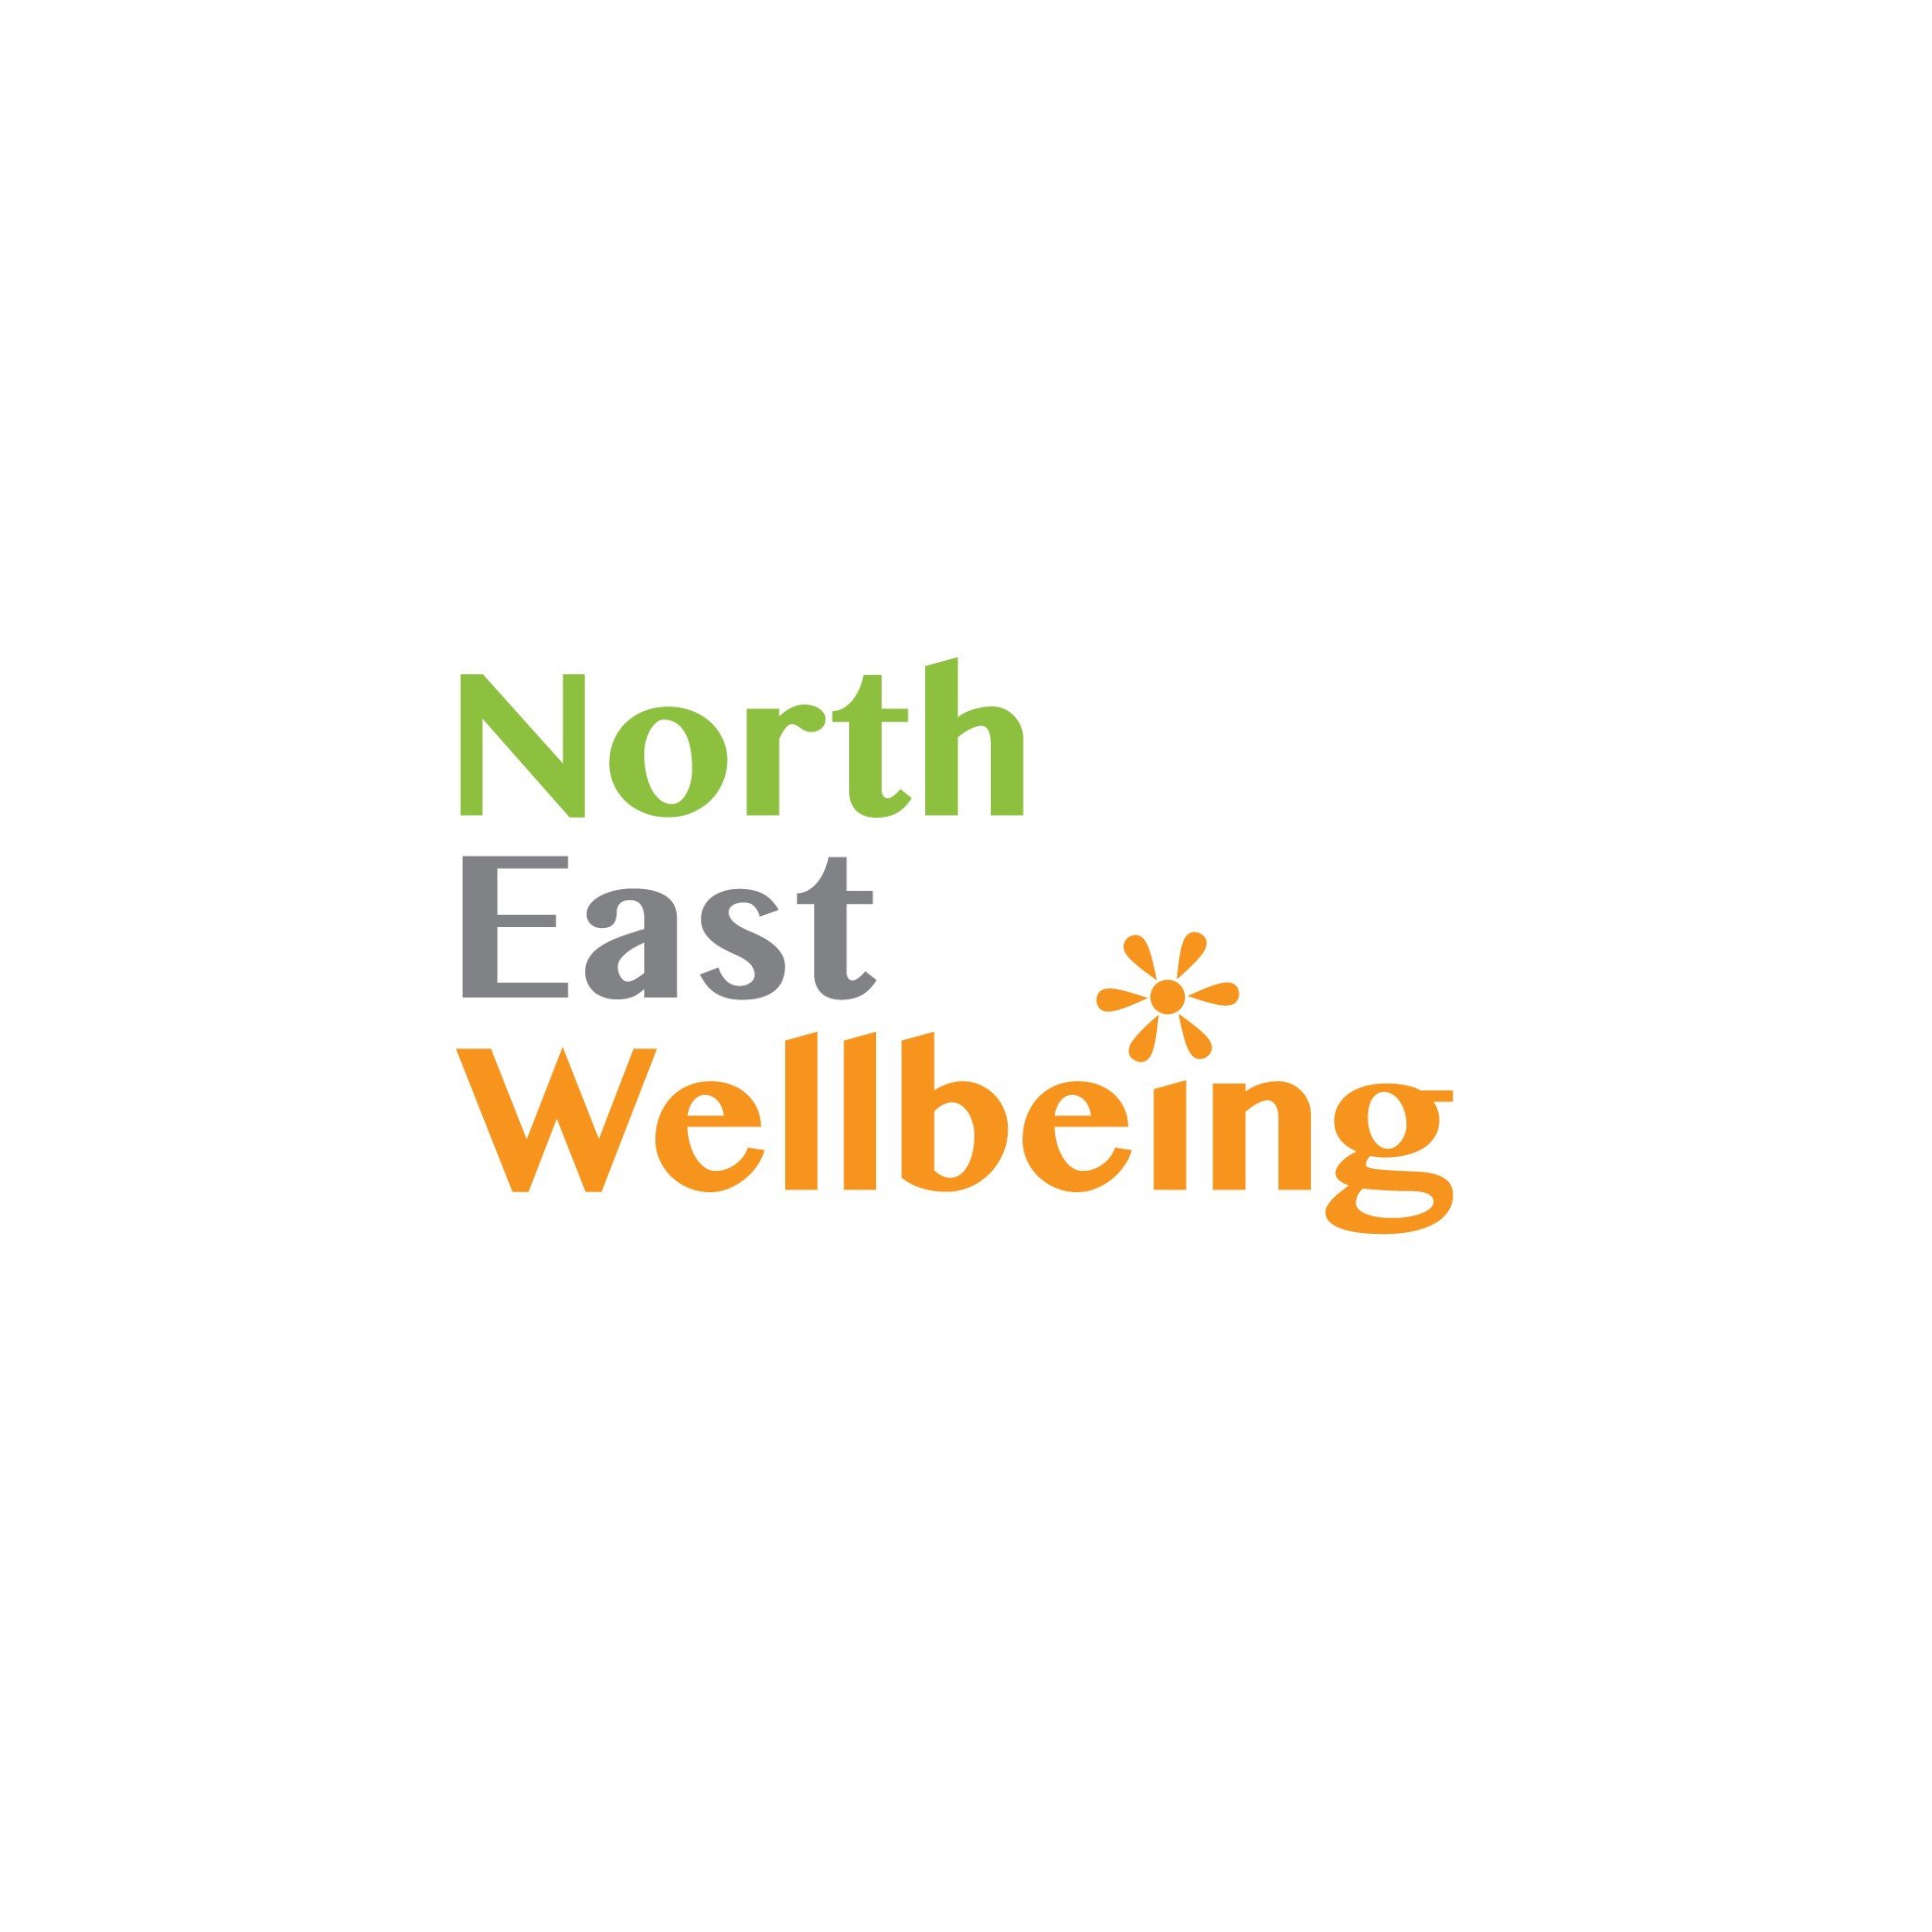 Working together to create new outcomes.

Providing a range of professional services to children and the educational community within the North East of England.